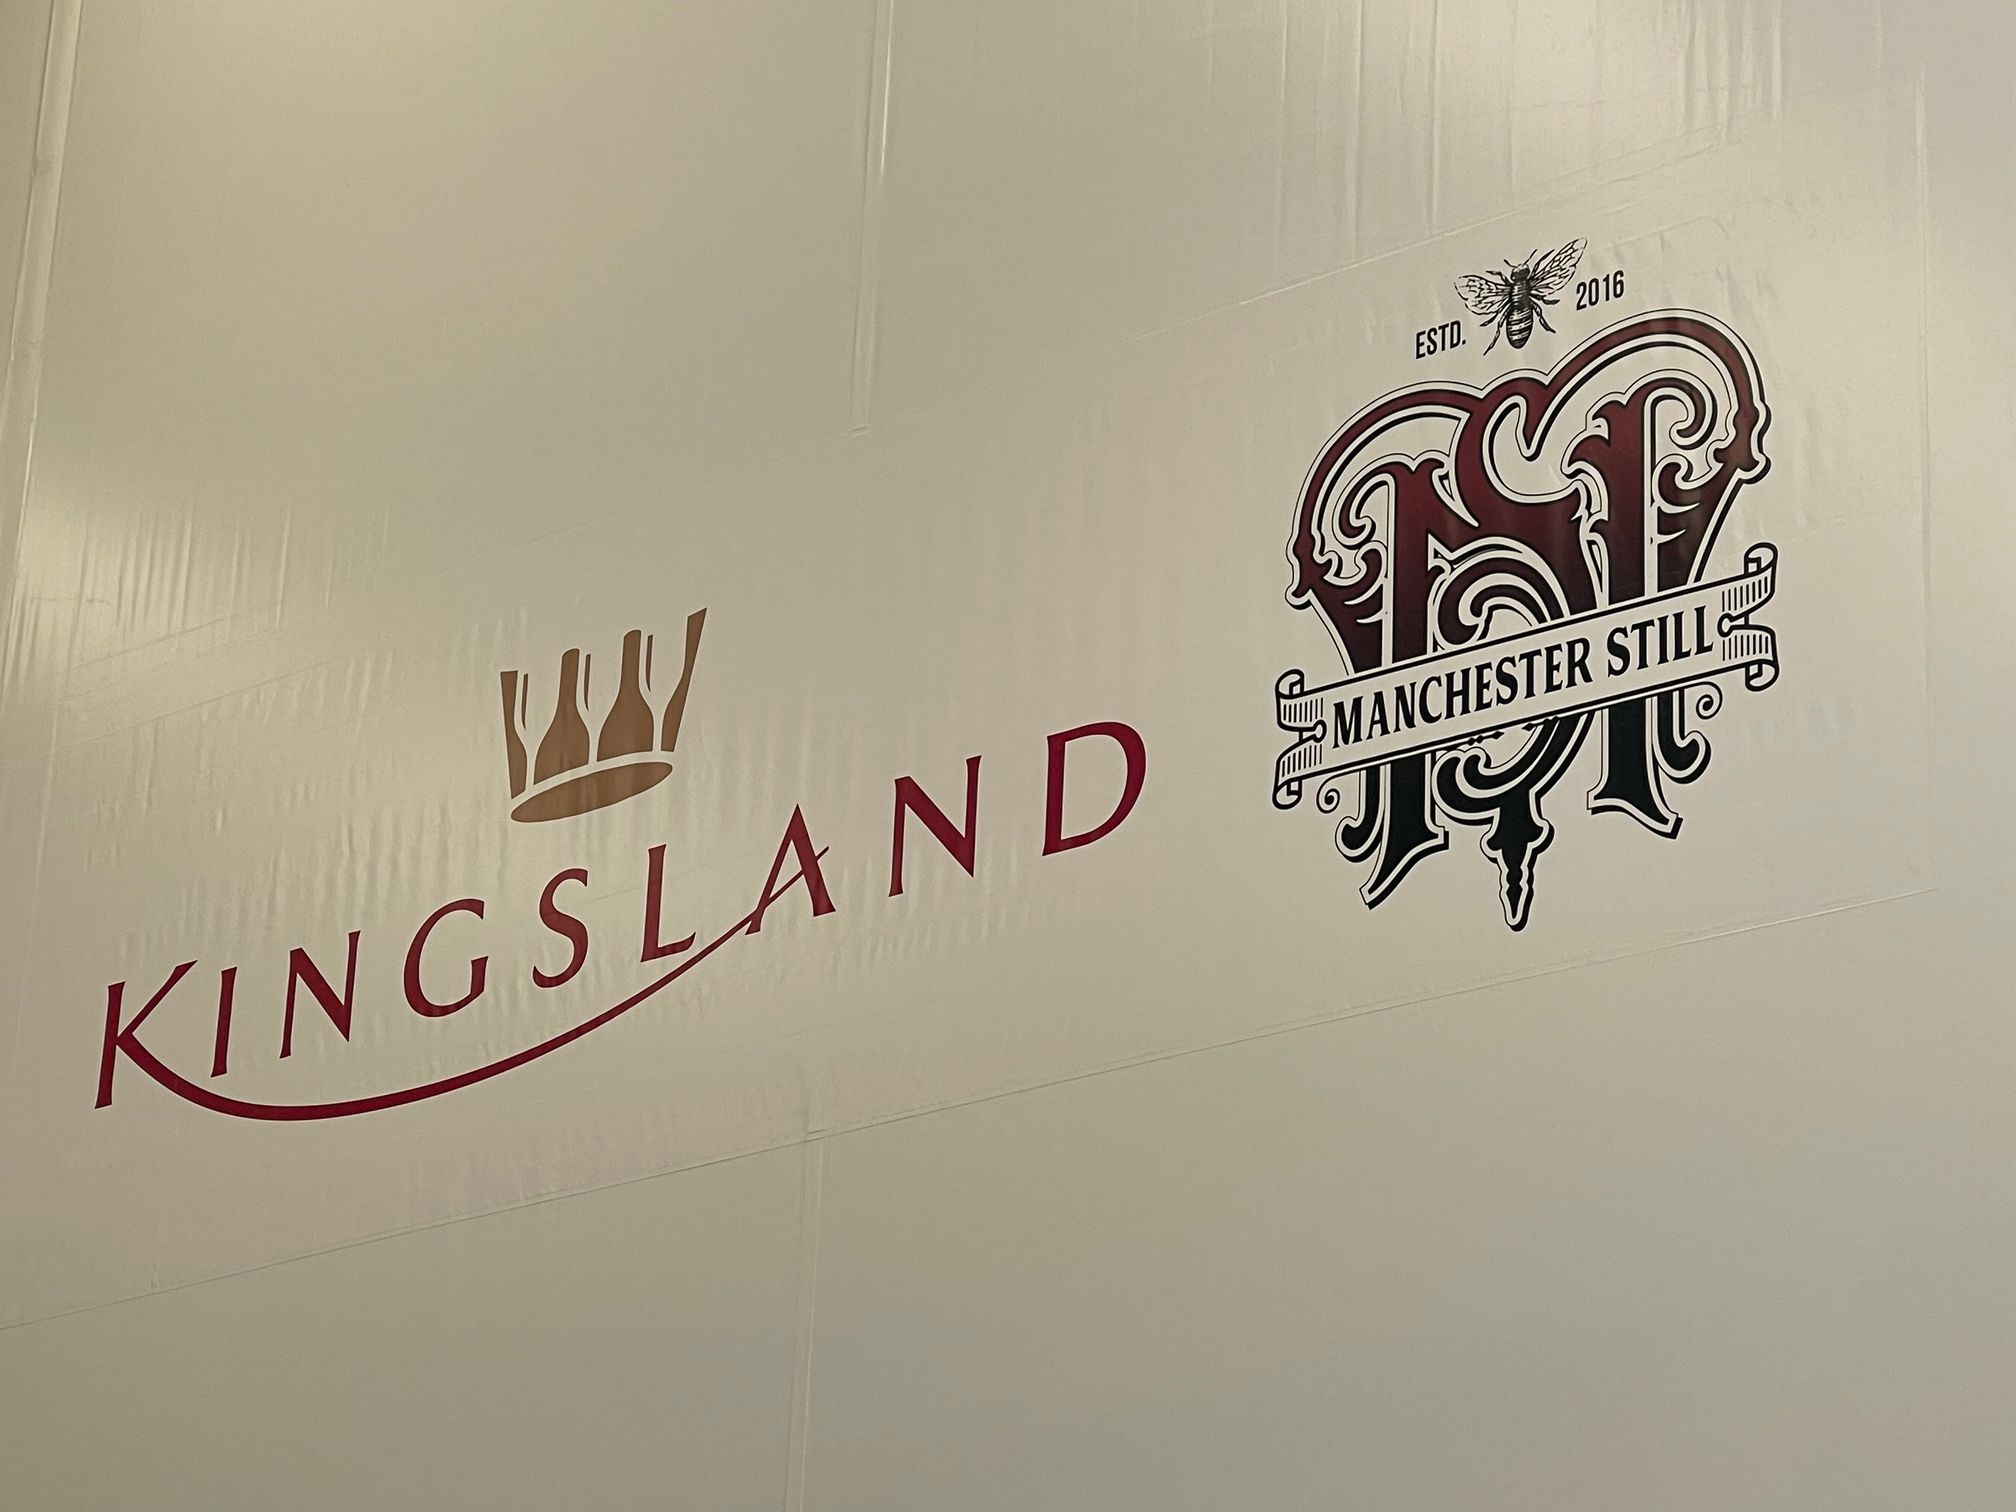 Kingsland Drinks Group partners Manchester Still to open new craft spirits facility